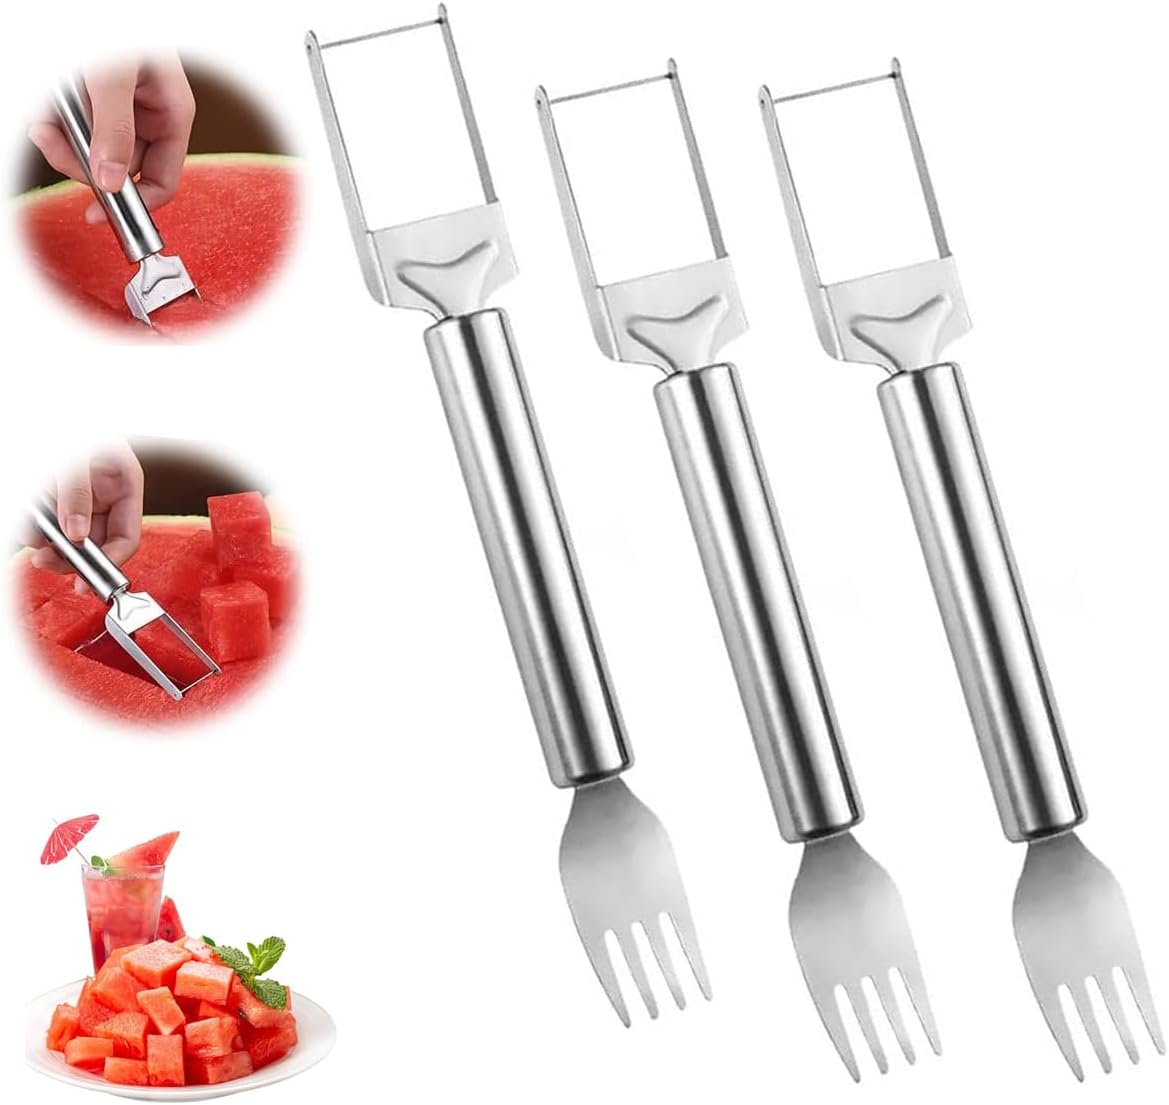 2-in-1 Stainless Steel Fruit Cutter, Upgraded Watermelon Fork Slicer Cutter Slicer Tool, Dual Head Fruit Forks Slicer Knife with Round Handle (3PCS)